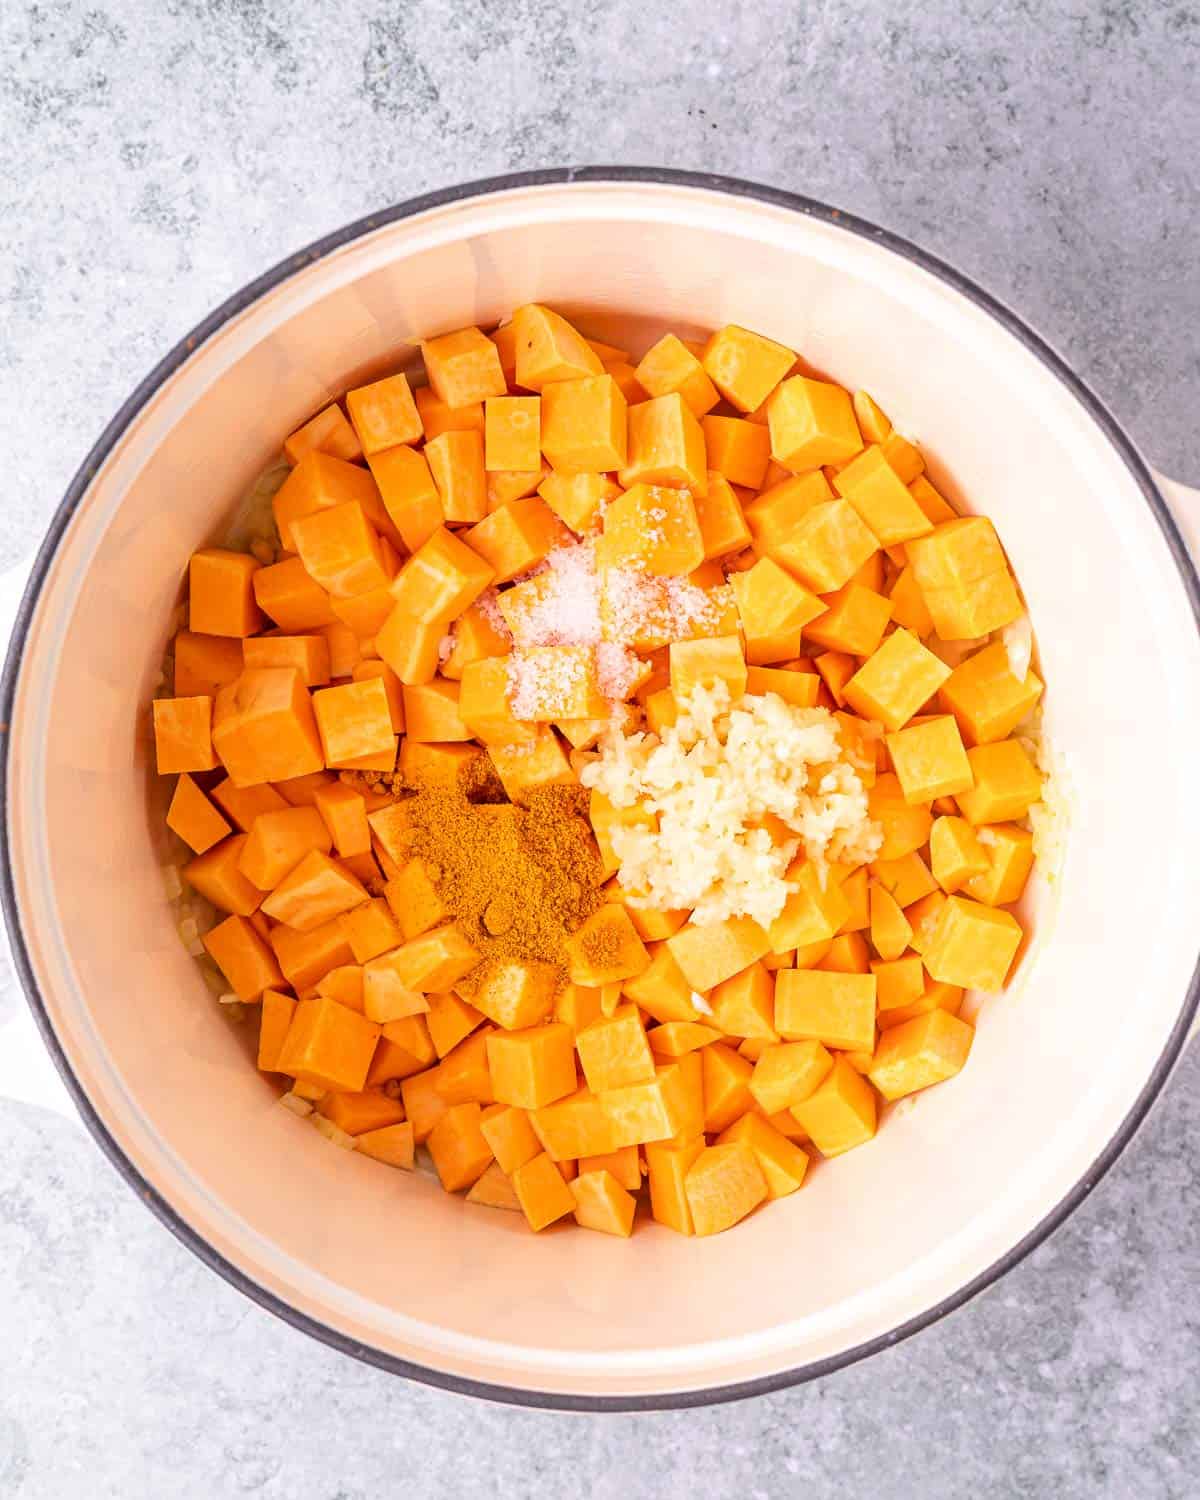 Cooking cubed sweet potato in a dutch oven.